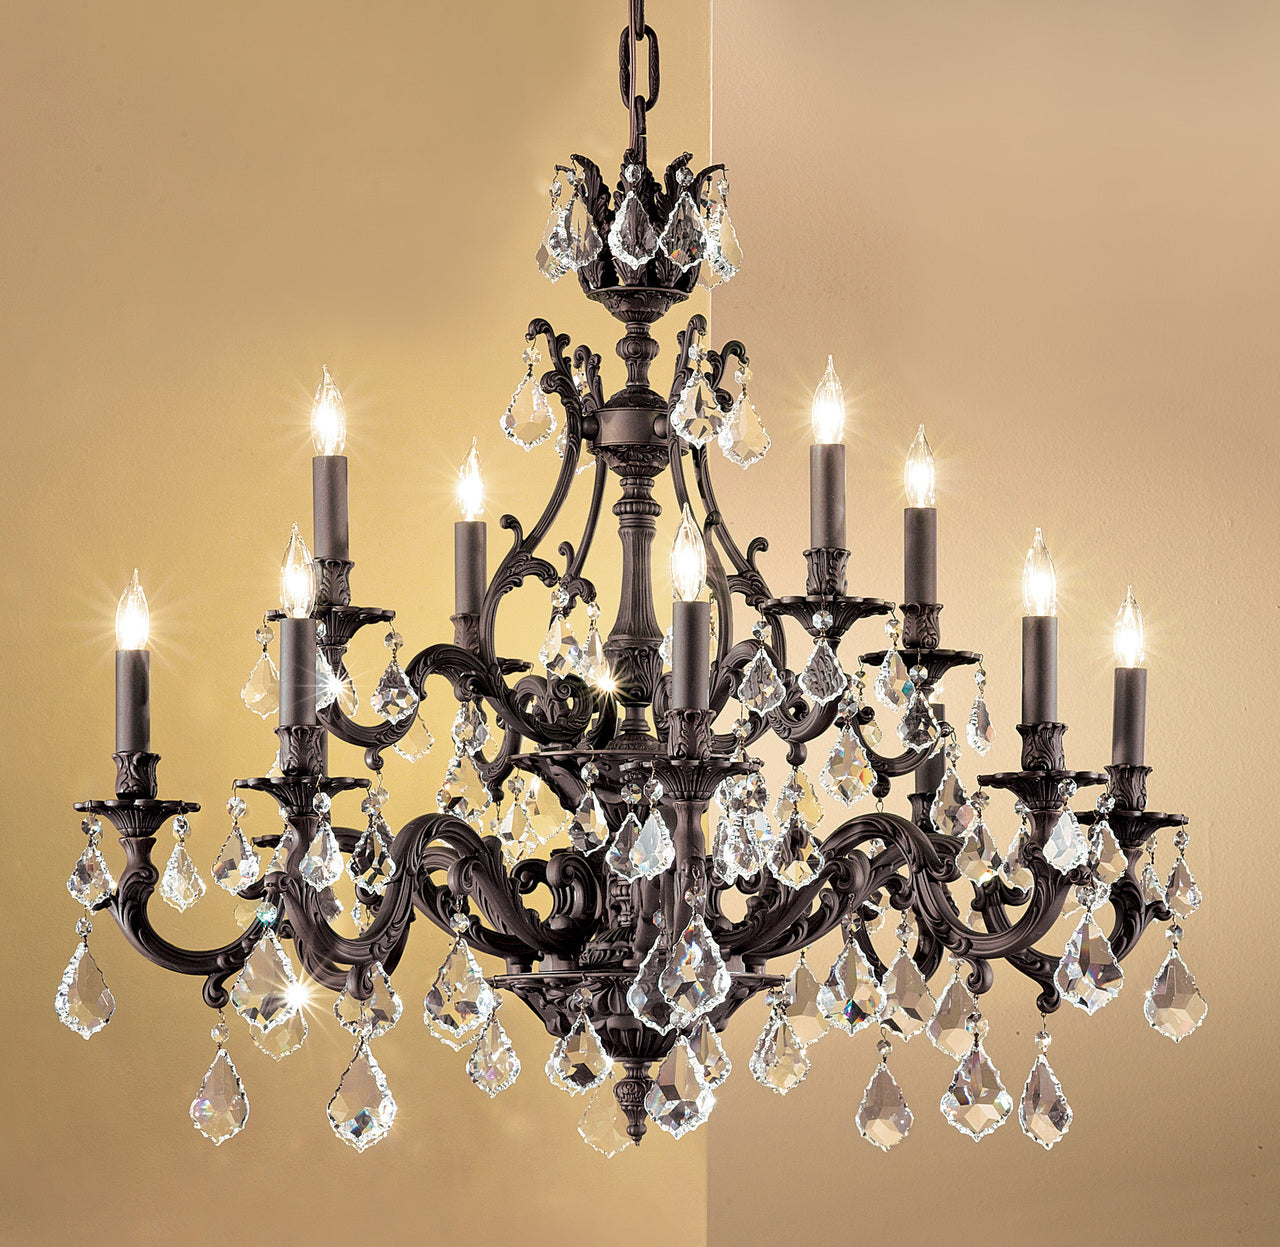 Classic Lighting 57349 AGP CBK Majestic Crystal Chandelier in Aged Pewter (Imported from Spain)